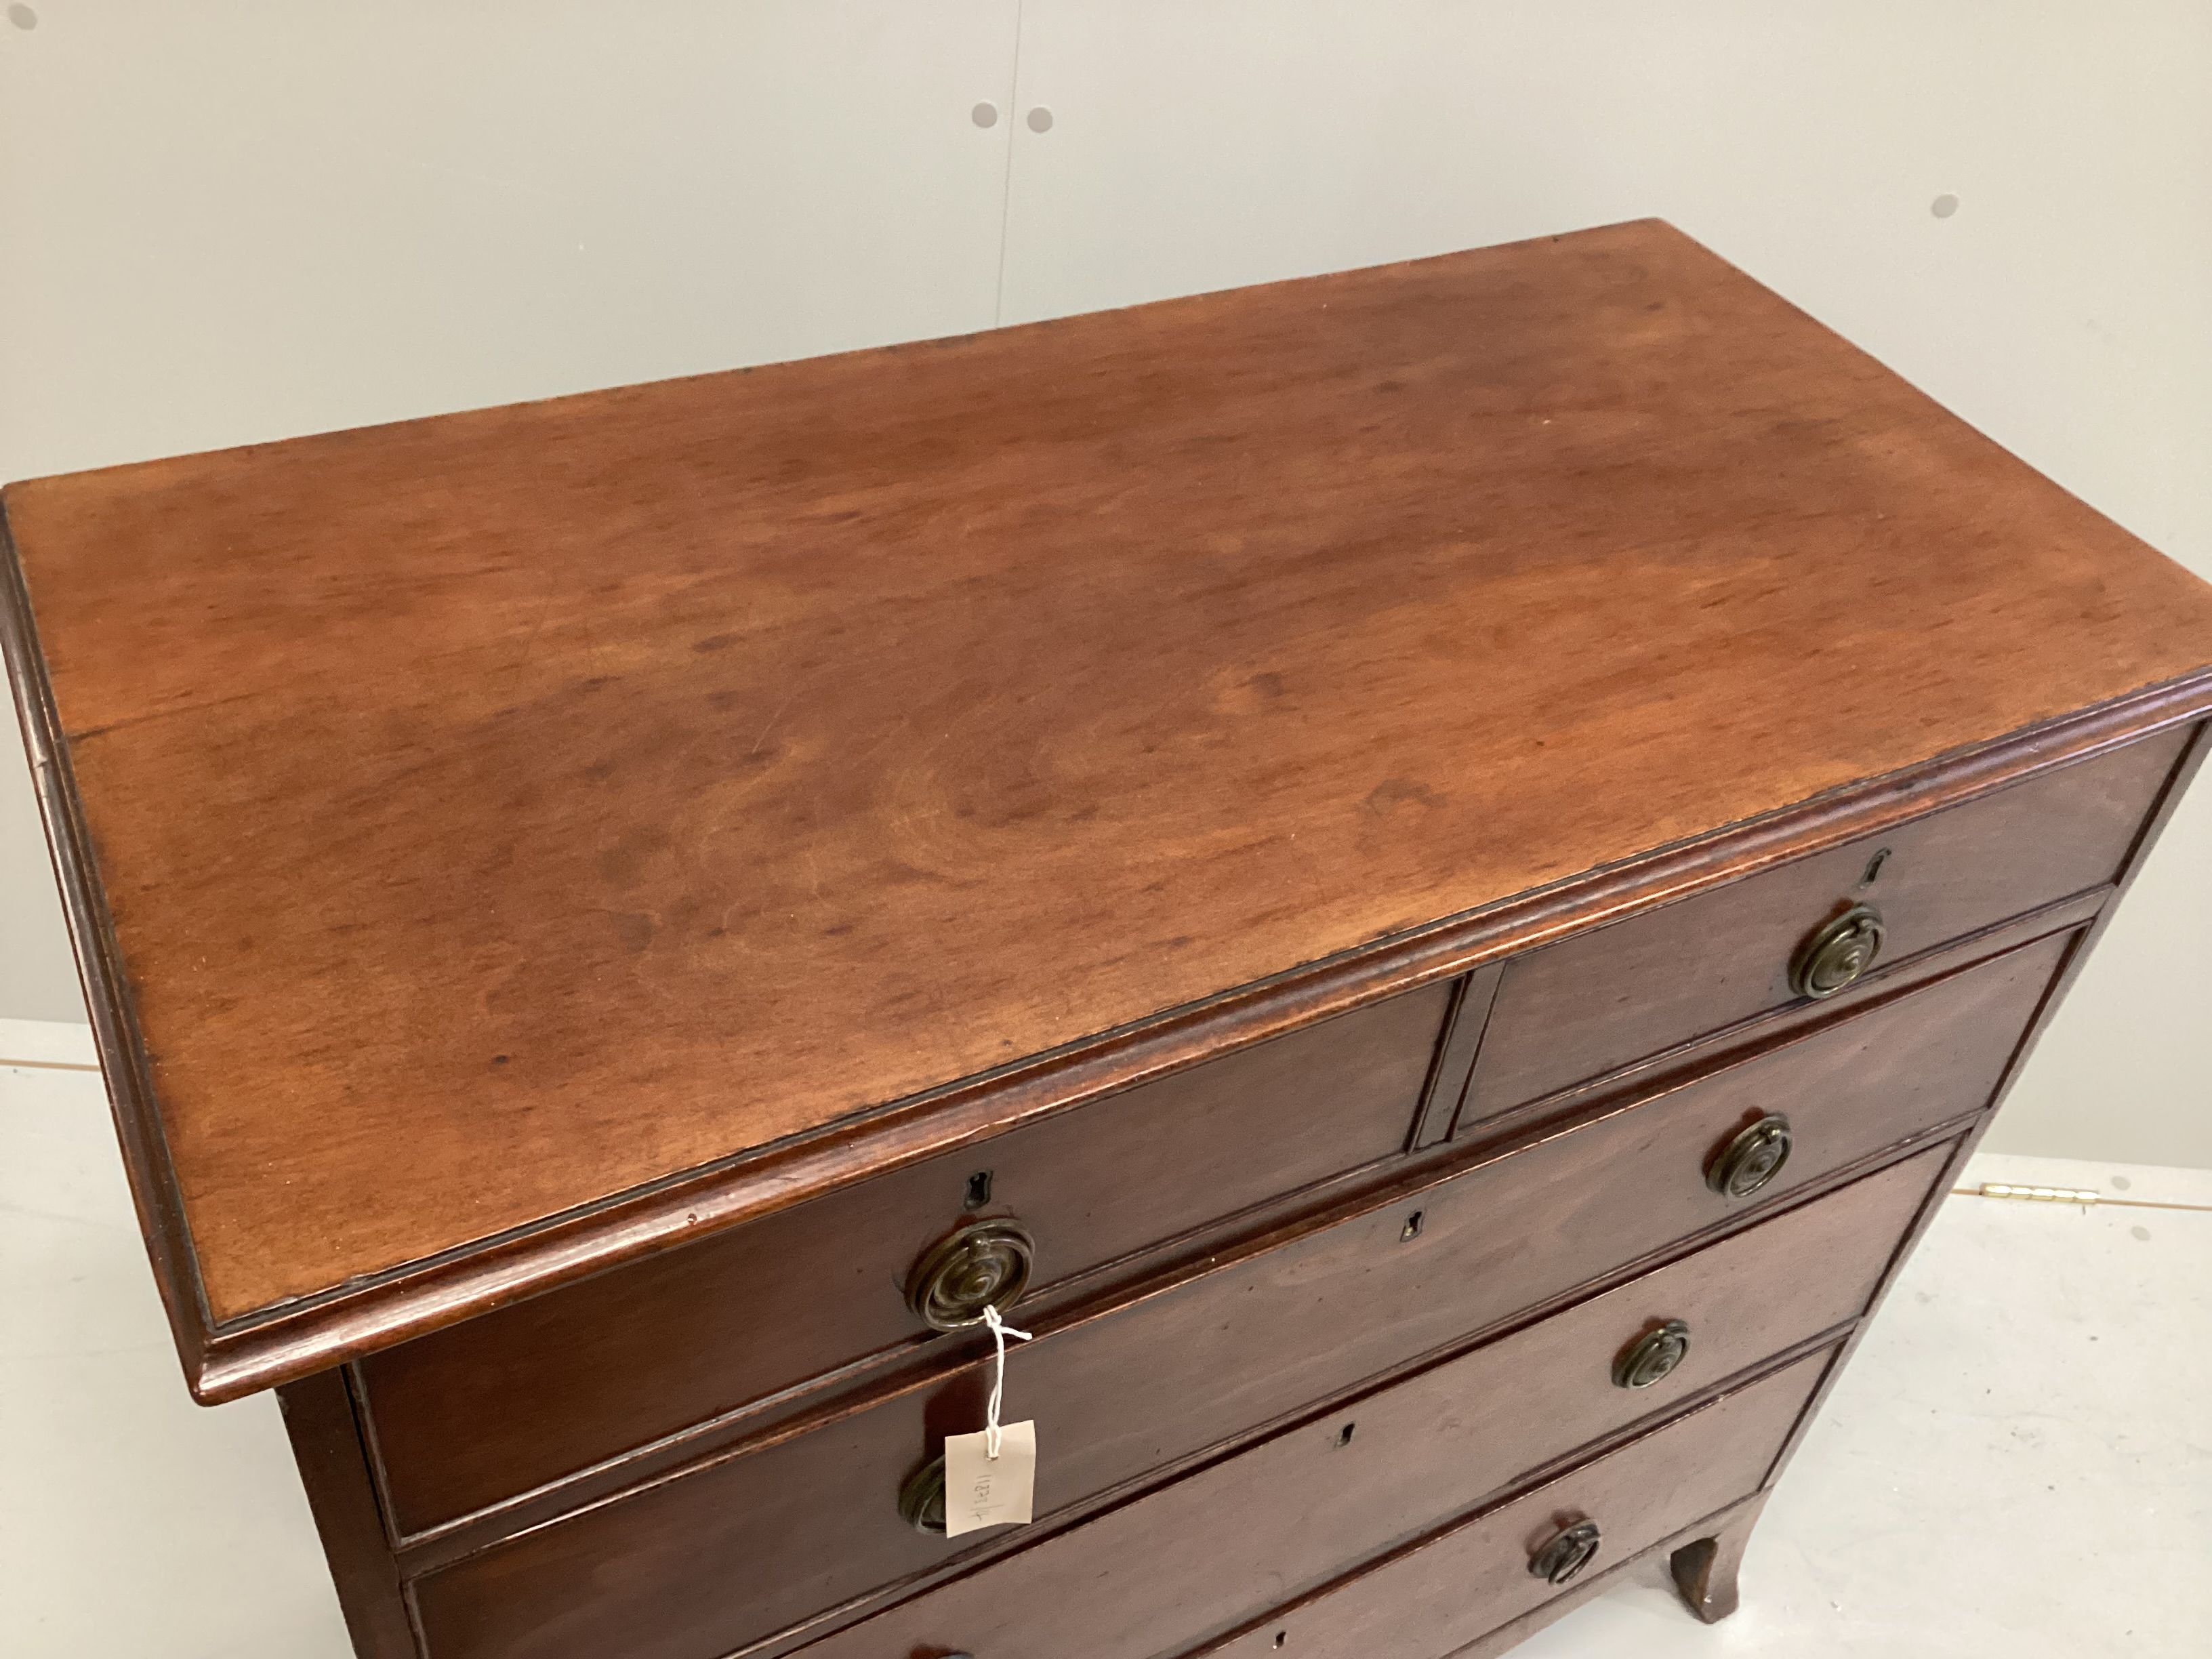 A small George IV mahogany five drawer chest, width 93cm, depth 47cm, height 89cm